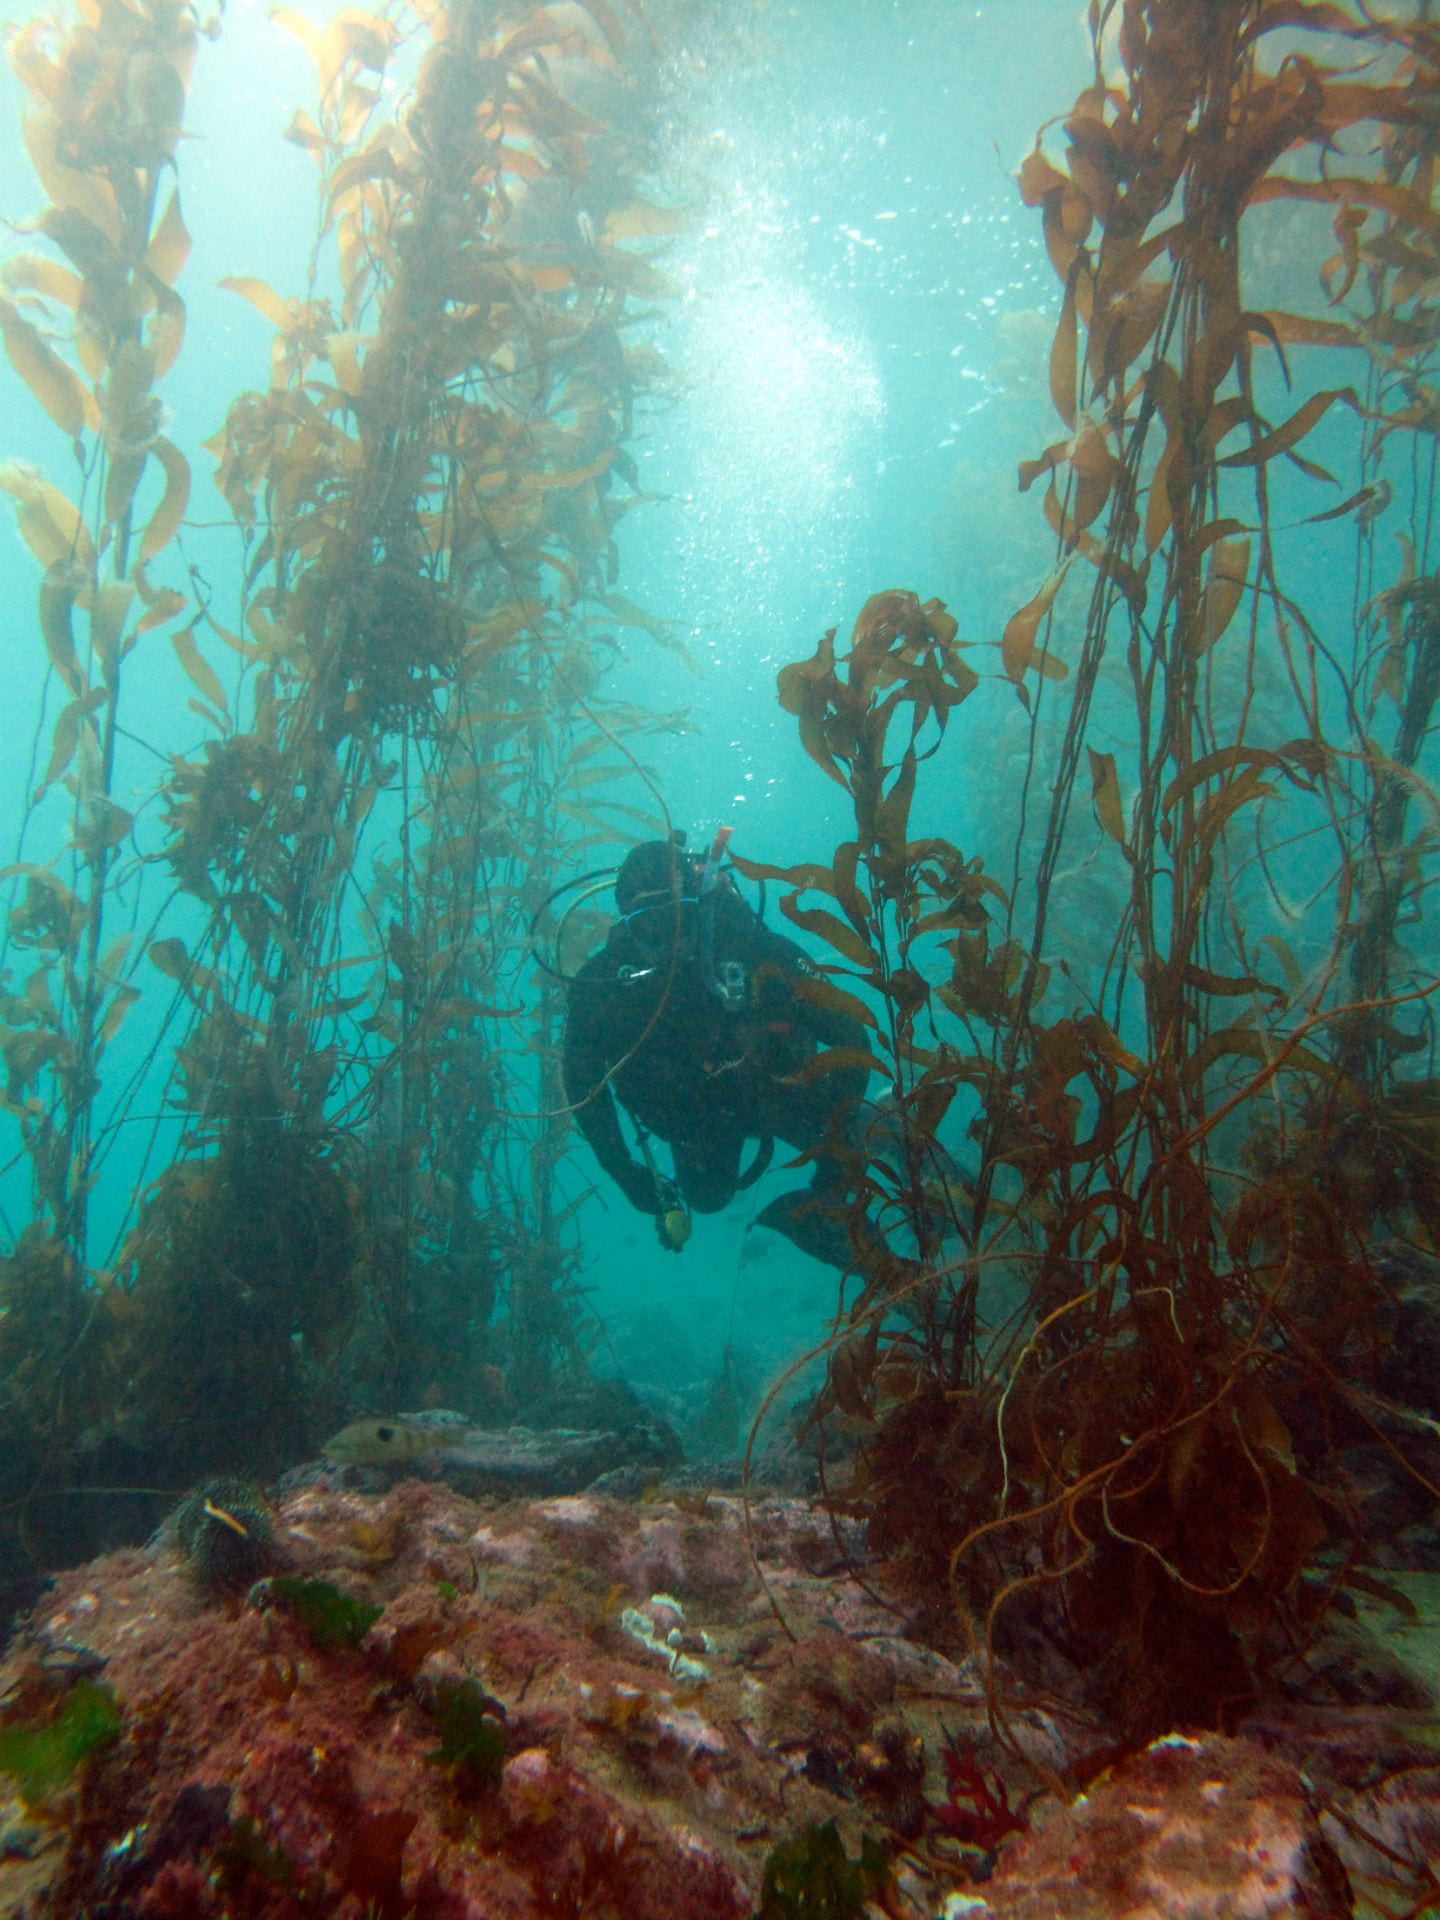 A SCUBA diver swims between tall fronds of kelp seaweed